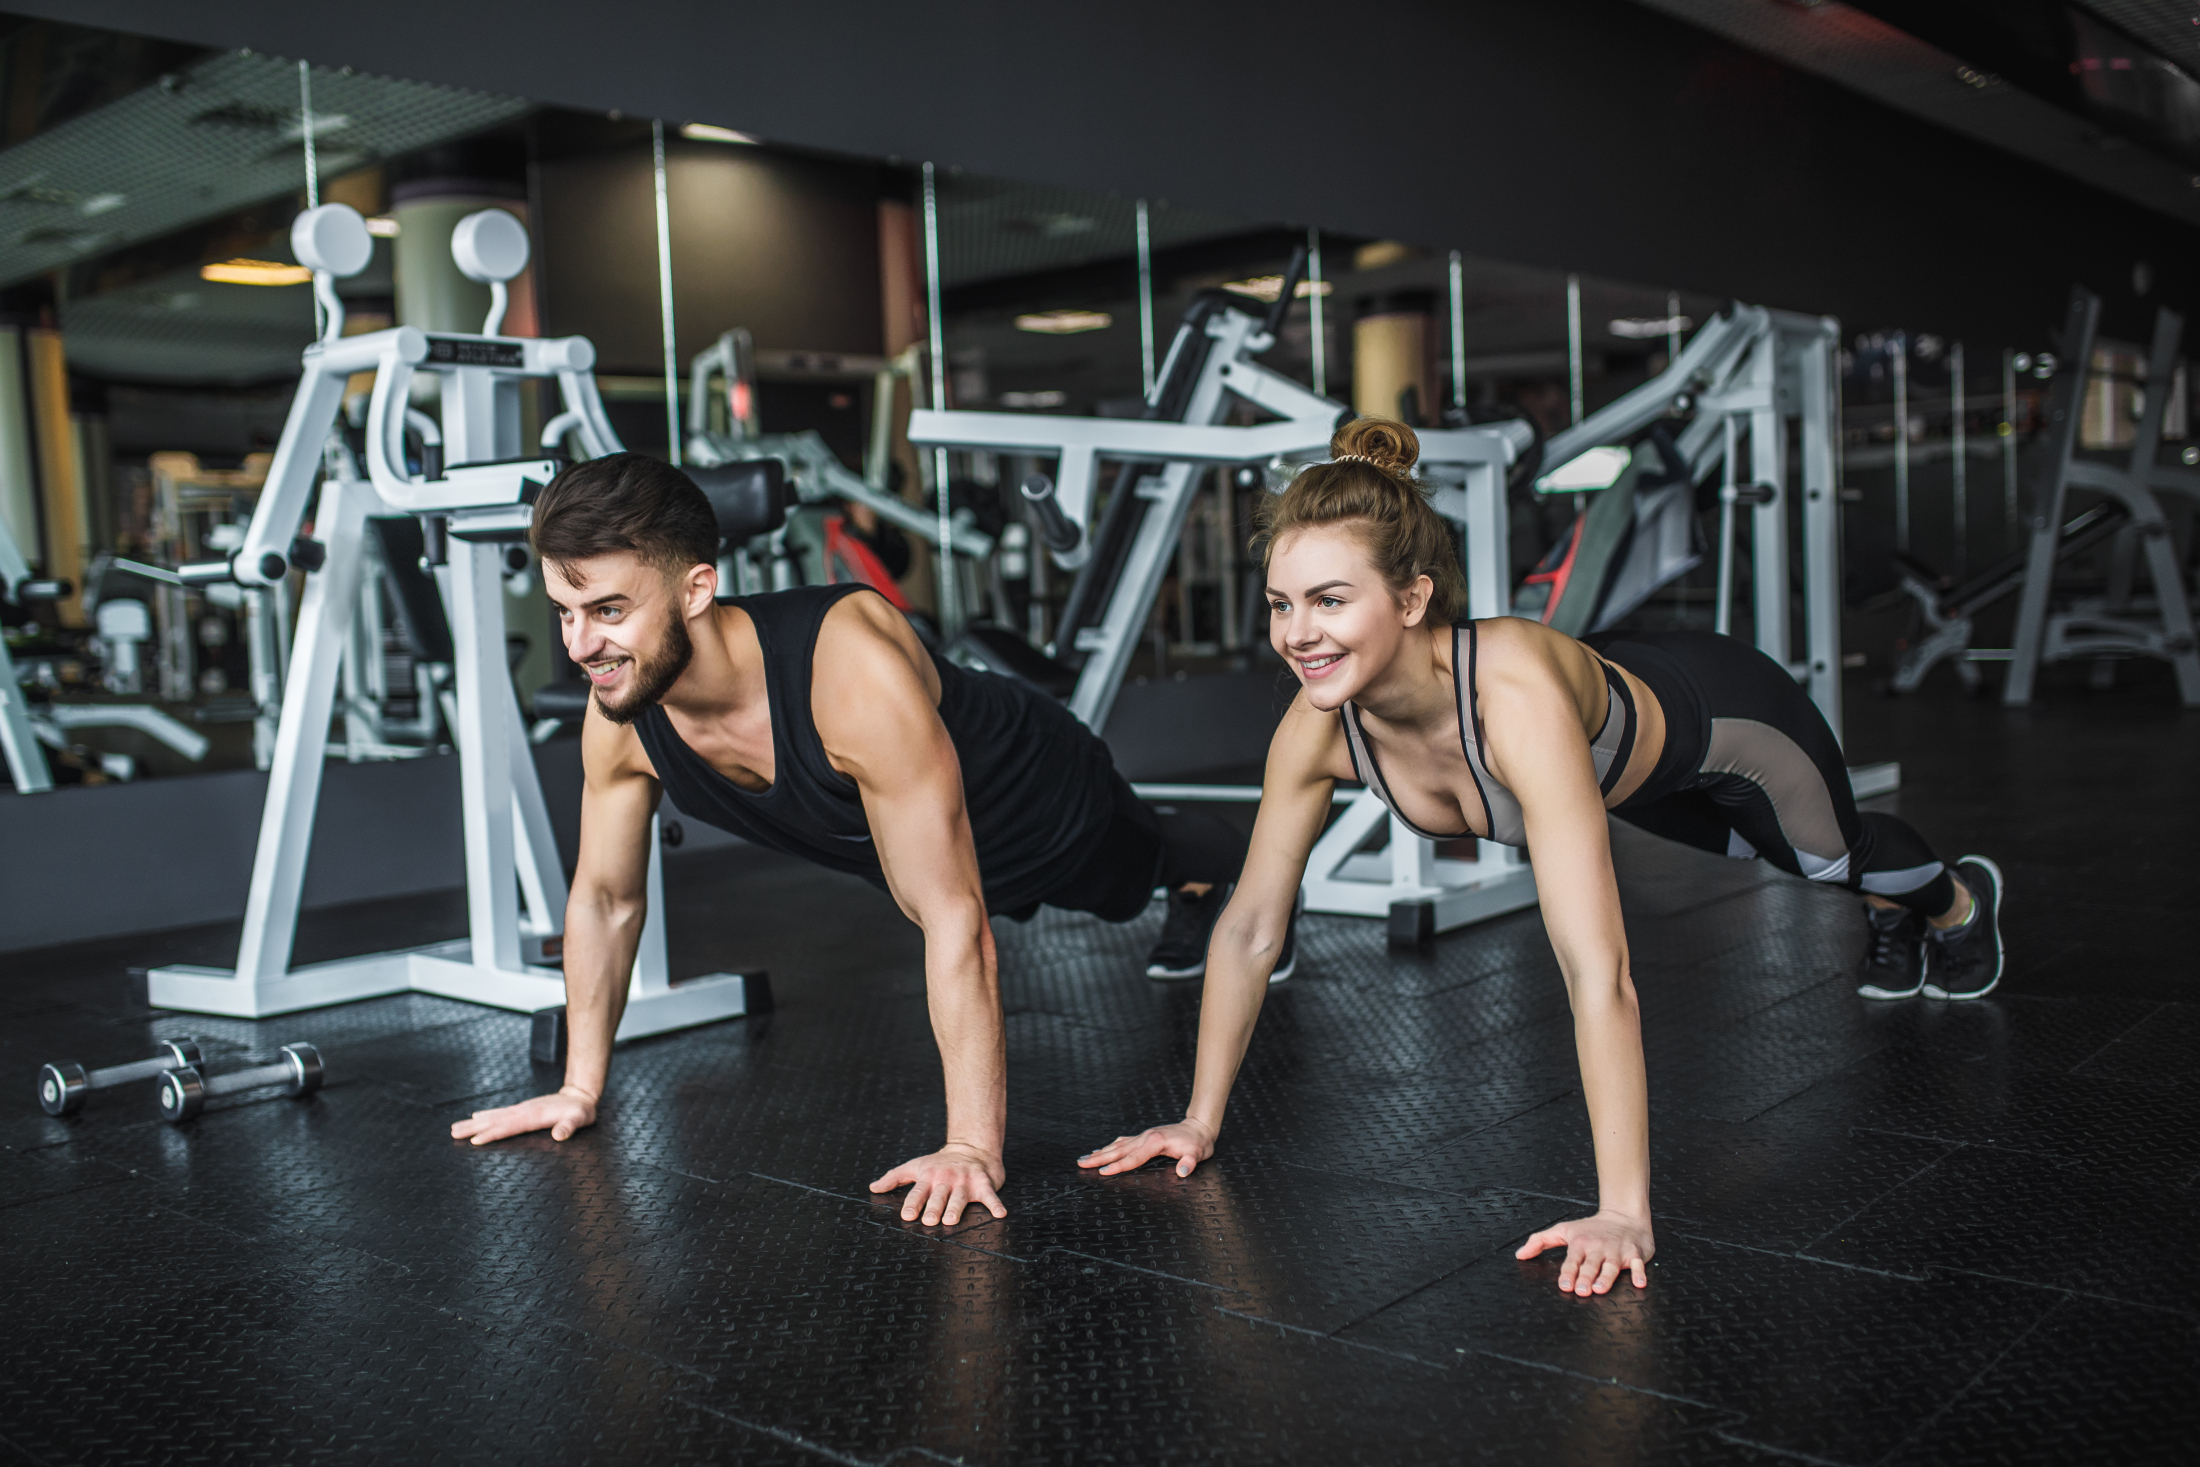 motivated-young-blond-woman-and-man-in-middle-of-workout-standing-in-plank-with-hands-clenched-together.jpg